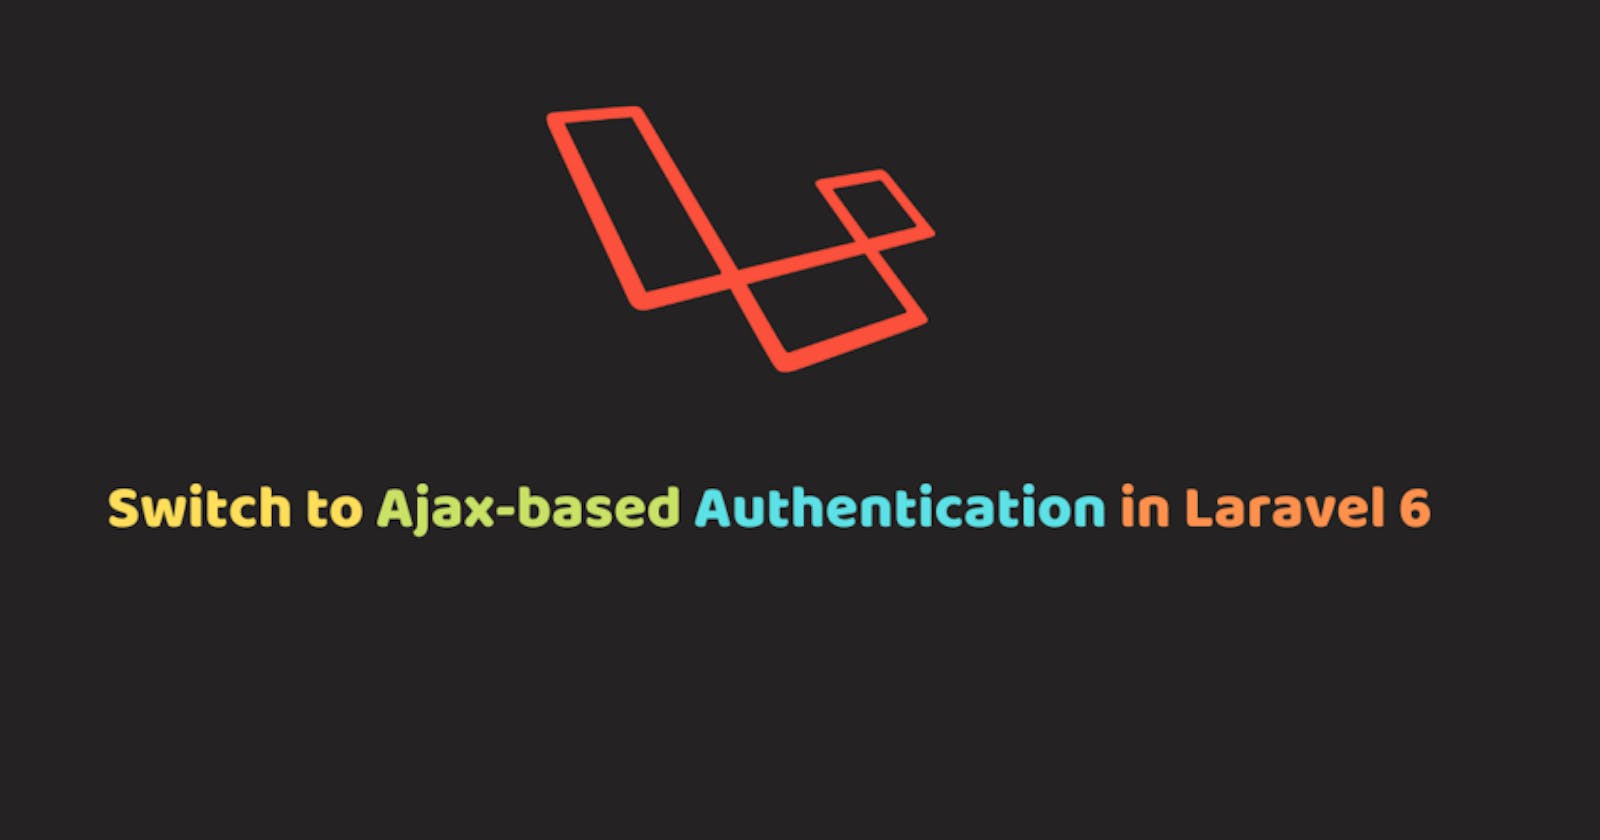 How To Switch to Ajax-based Authentication in Laravel 6